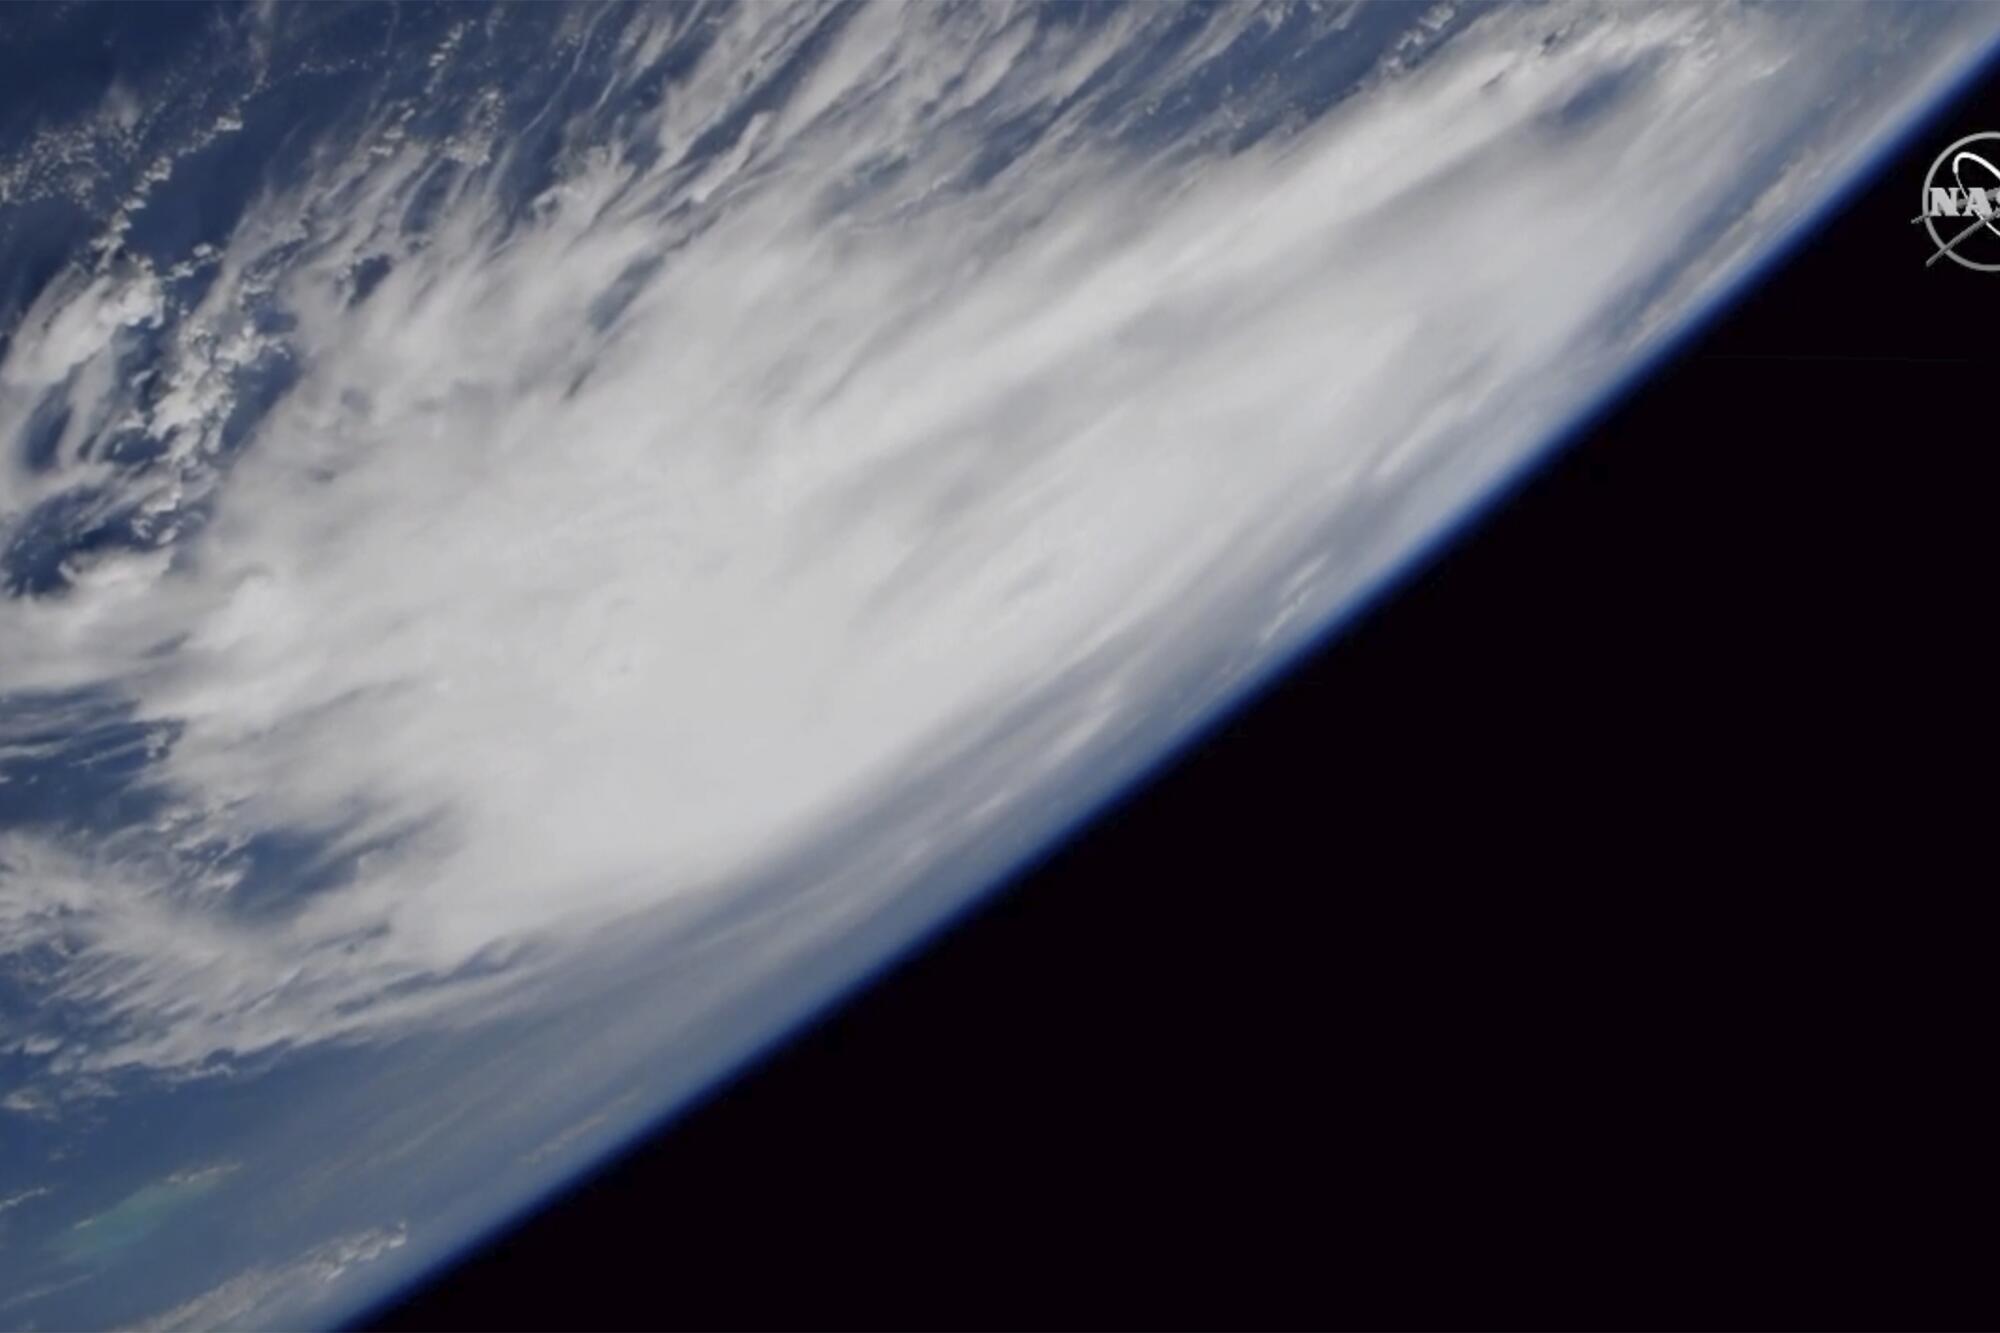 A photograph taken from space shows the white swirl of a hurricane.